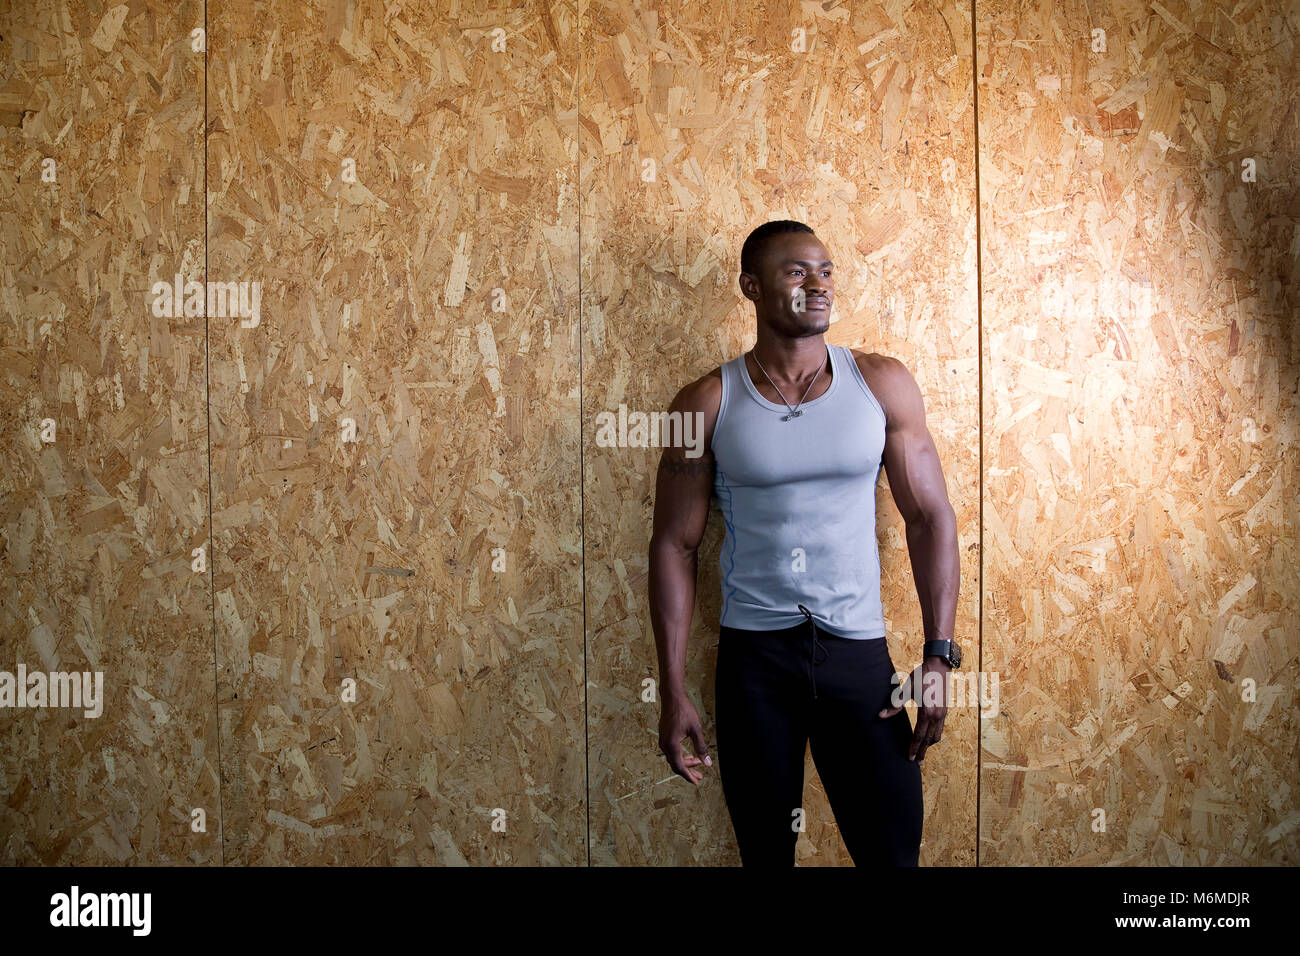 African man posing in gymnasium Banque D'Images